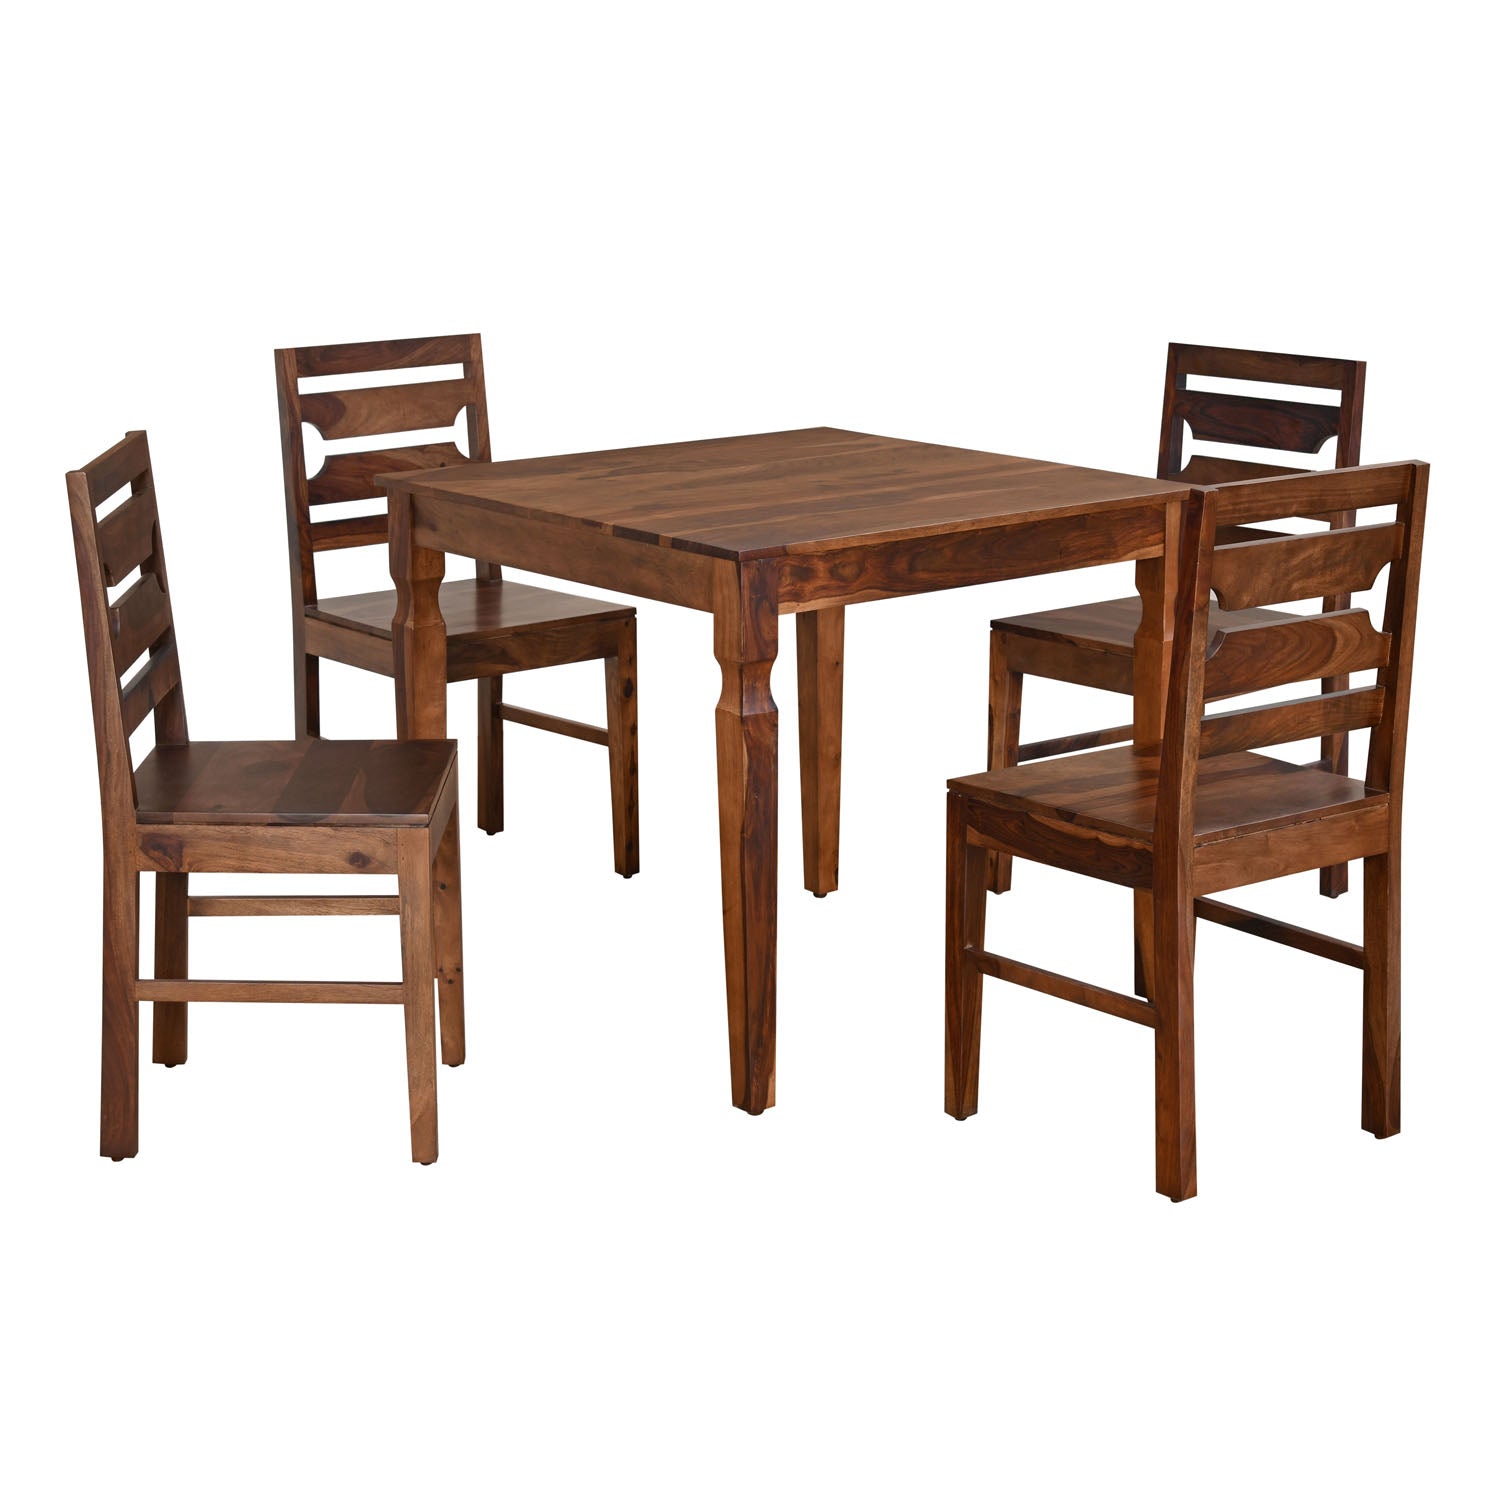 Europa Solid Wood 4 Steater Square Dining Table Set (Walnut)